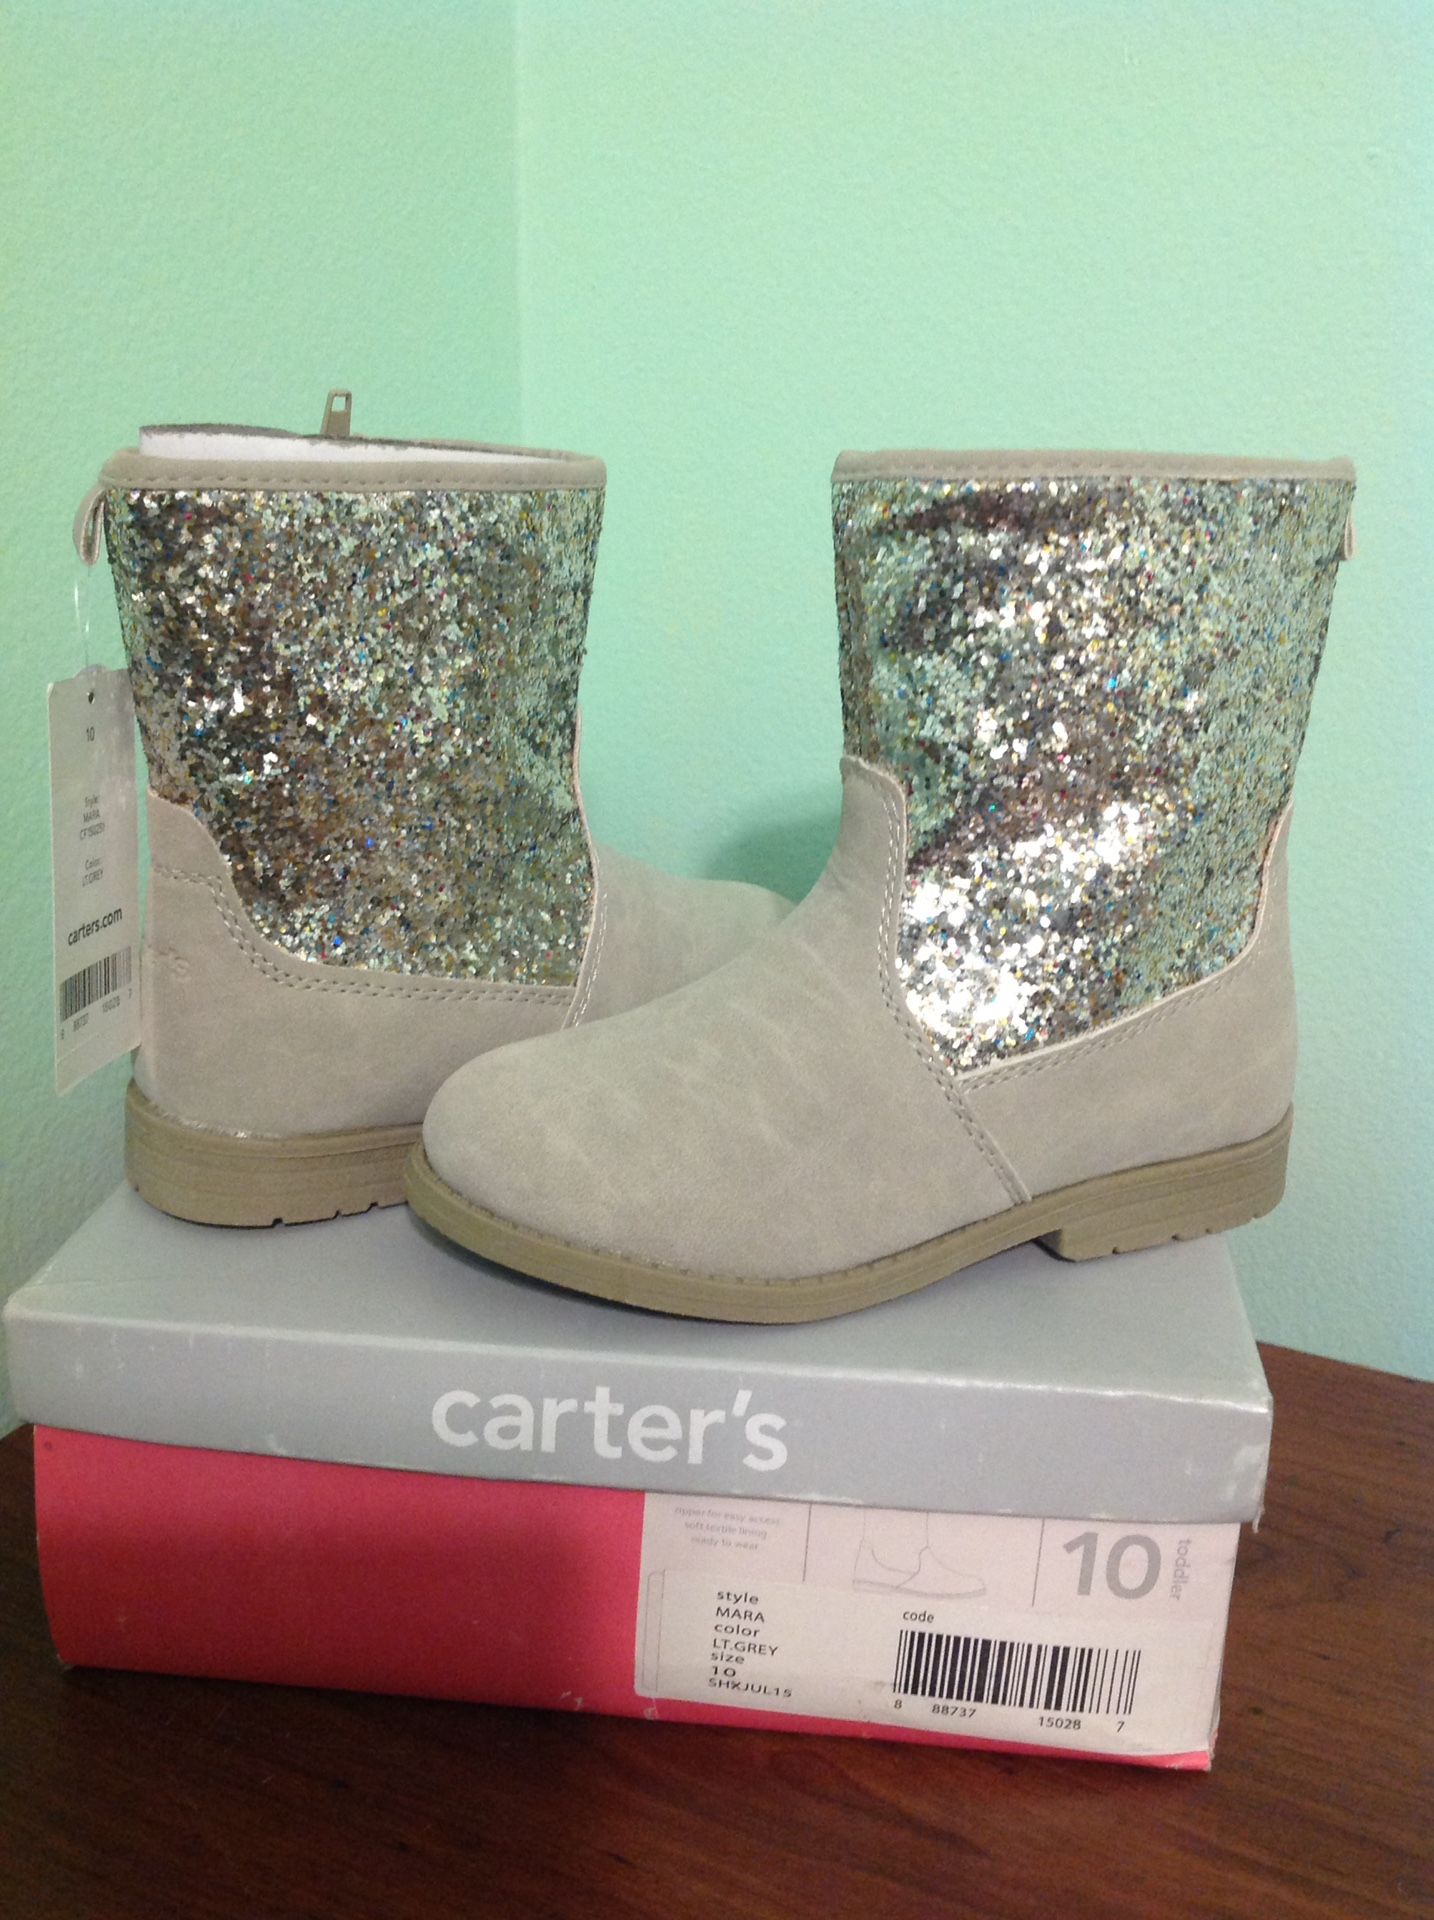 Carters Toddler Girls Boots Size 10